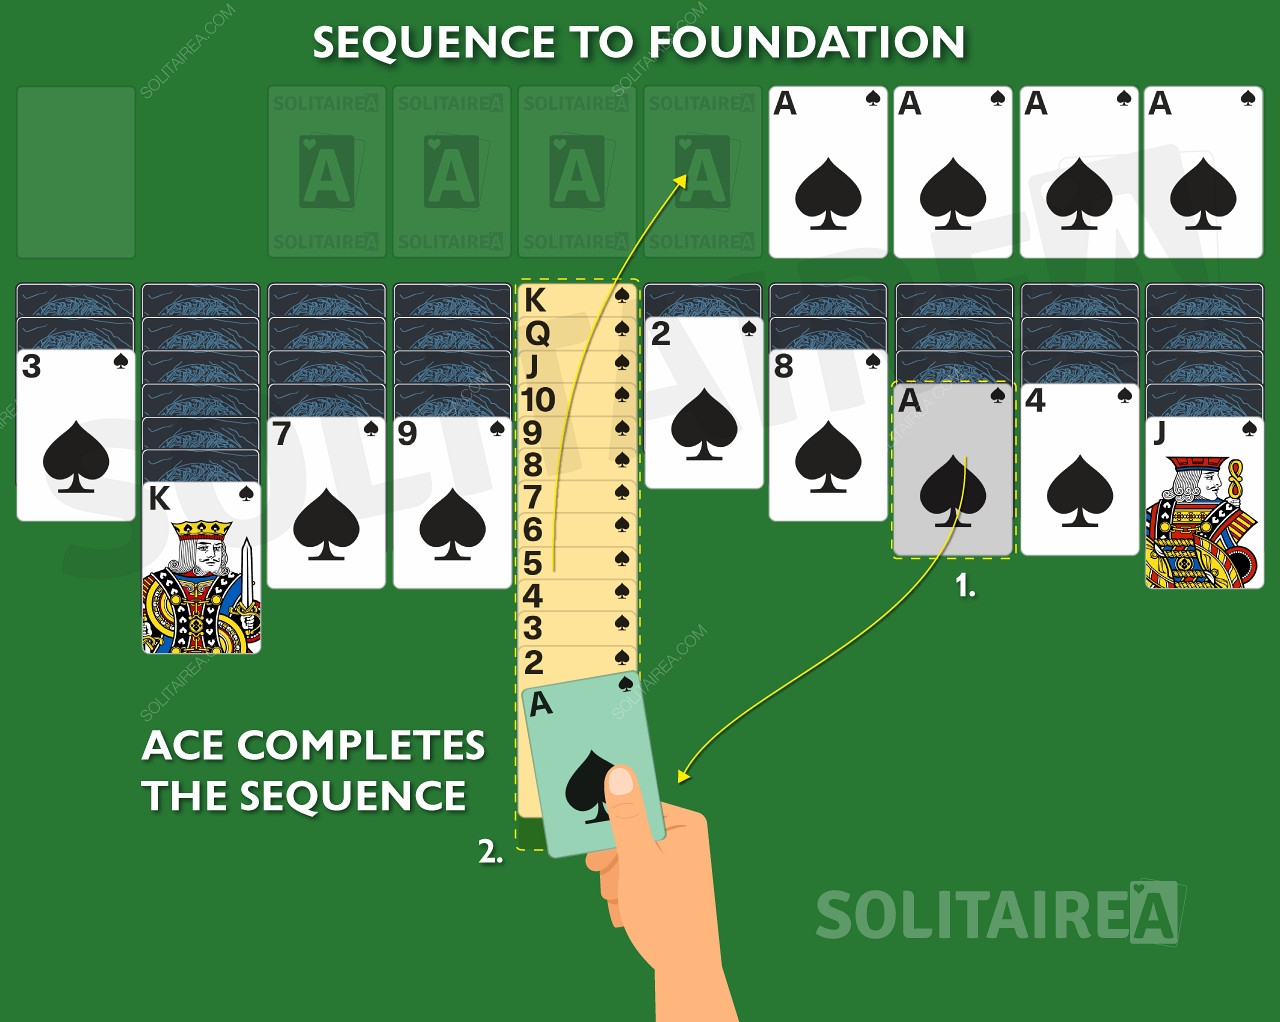 An King to Ace stack is moved to the foundation once completed. 